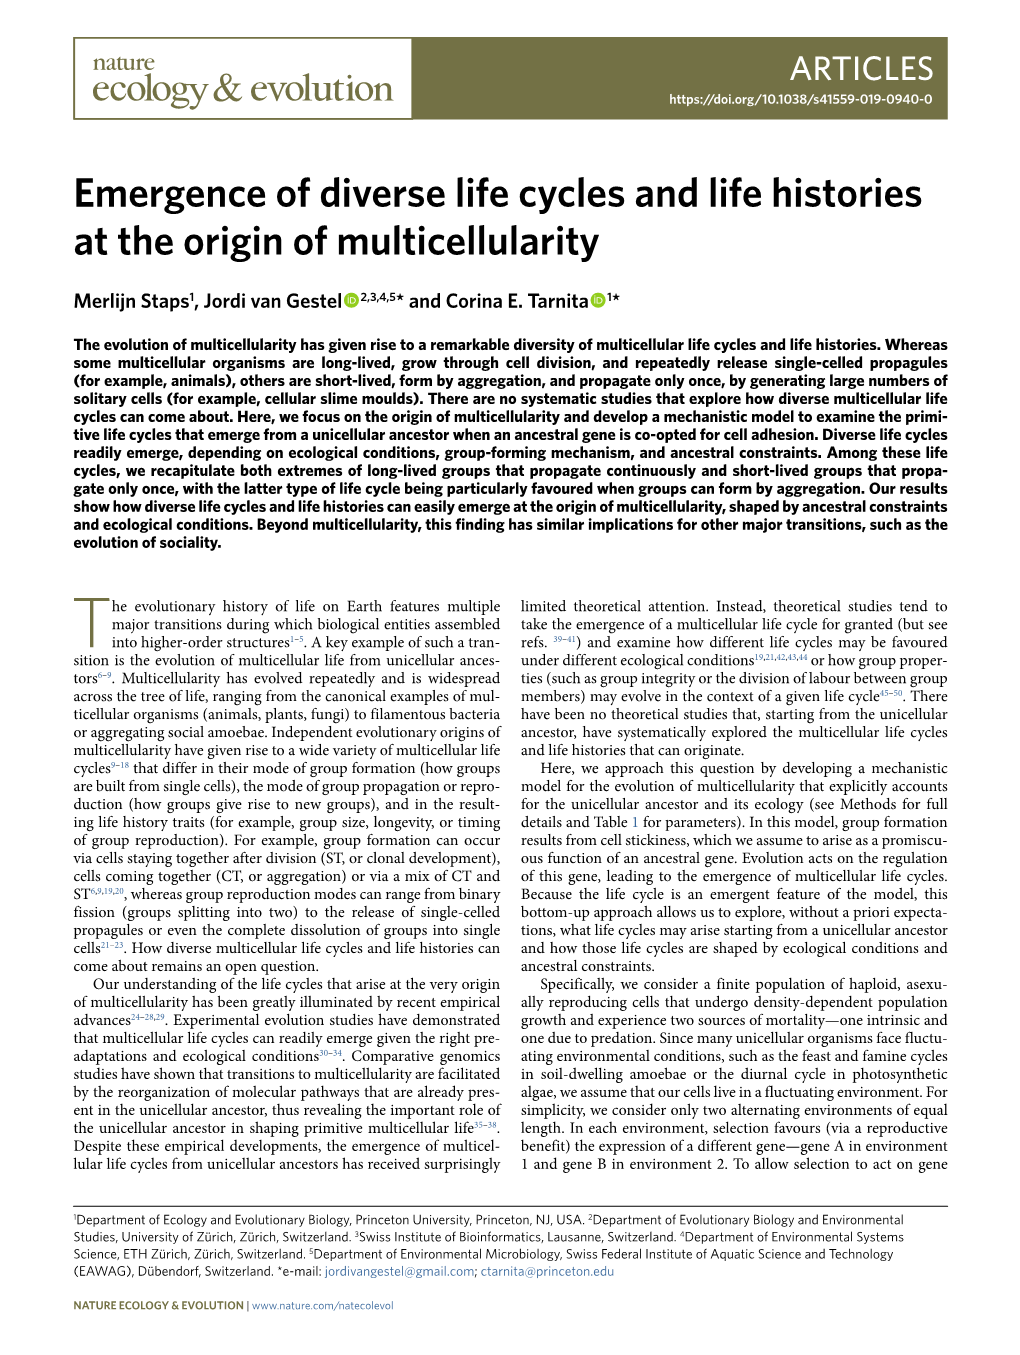 Emergence of Diverse Life Cycles and Life Histories at the Origin of Multicellularity